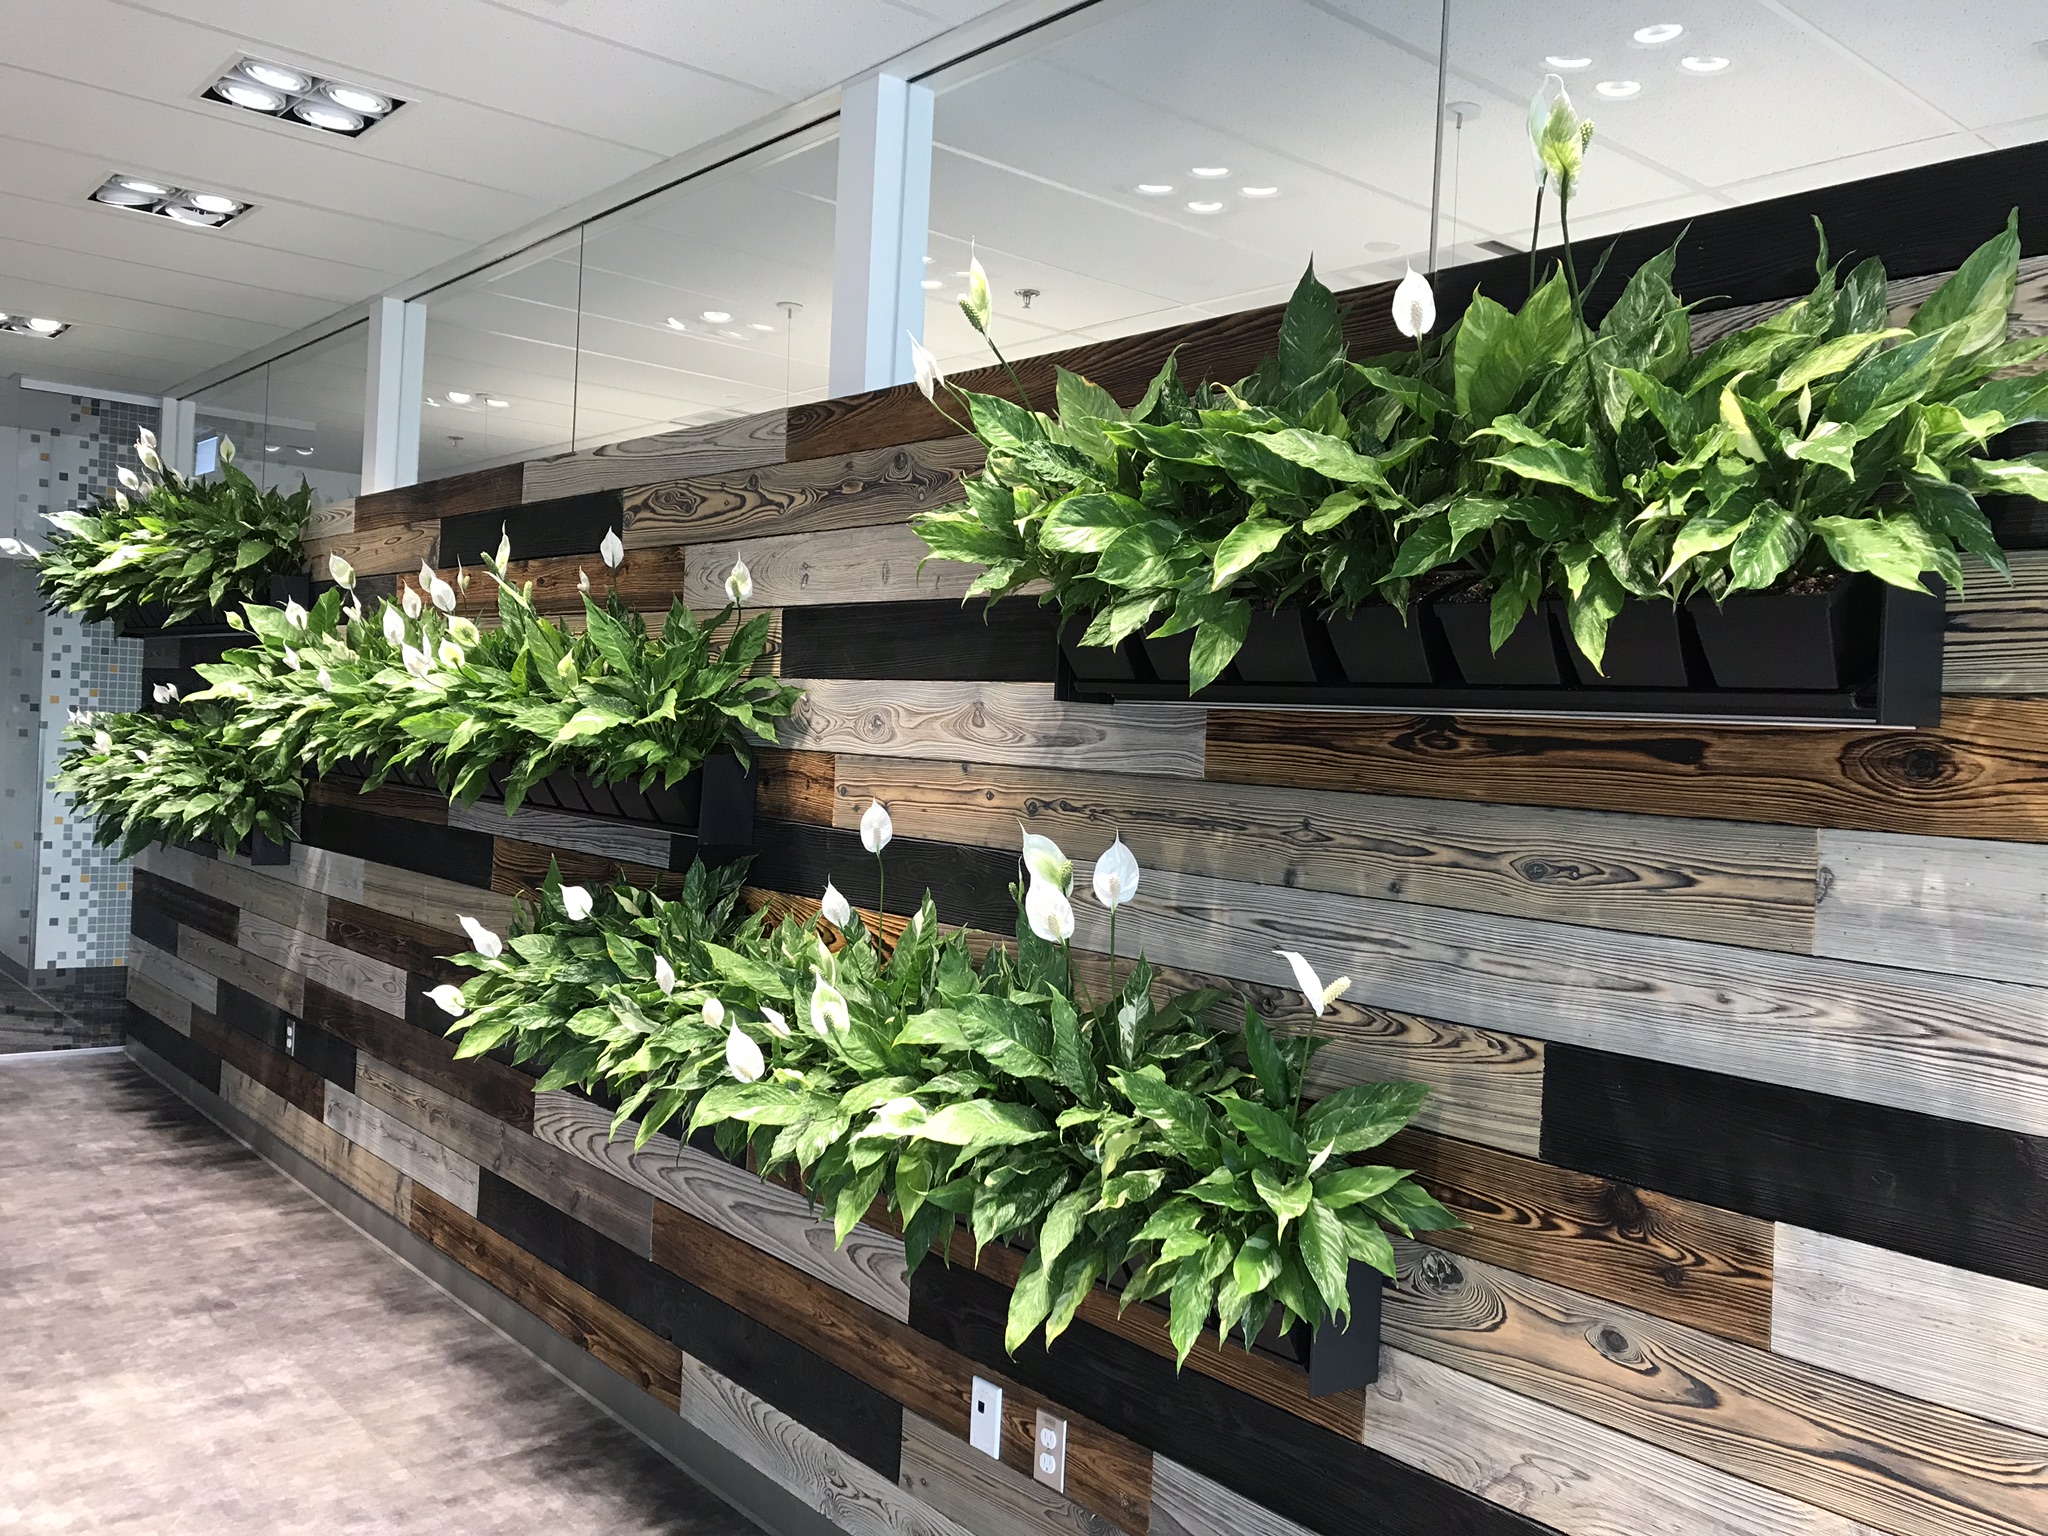 Biophilic Design. Wood paneling with Living wall full of Peace Lilies.